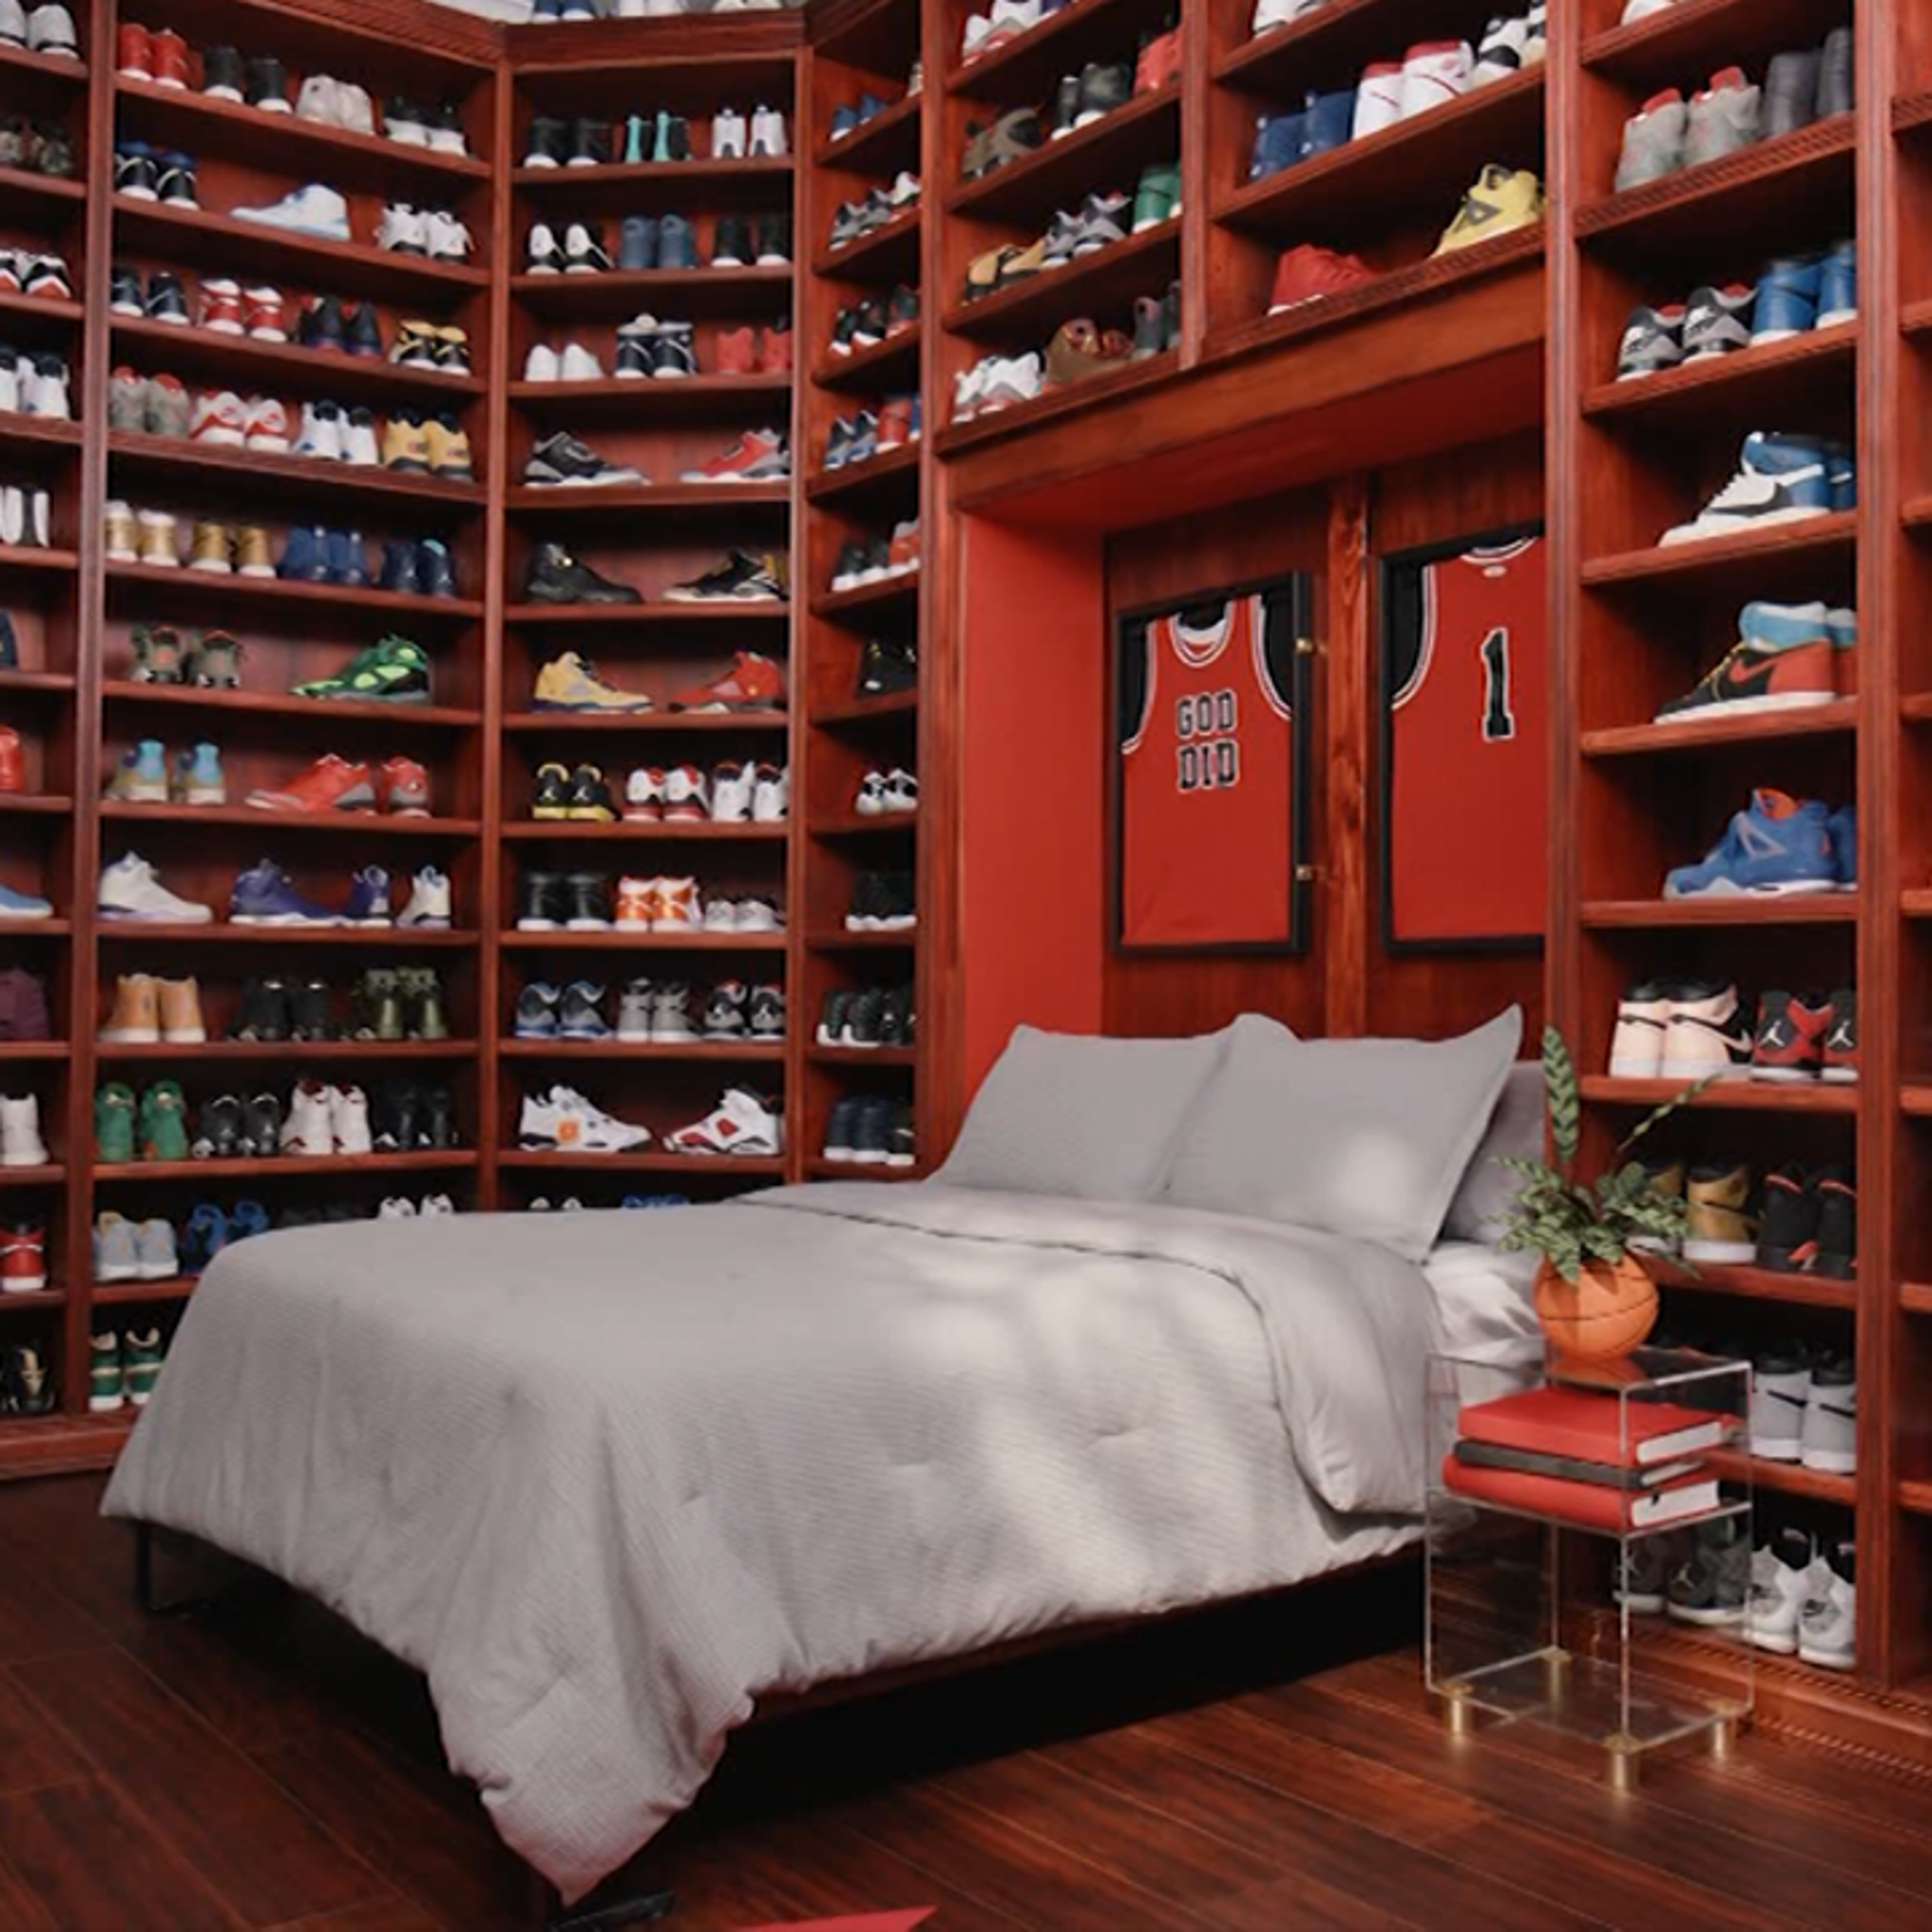 DJ Khaled is offering an Airbnb stay for a night in his sneaker closet